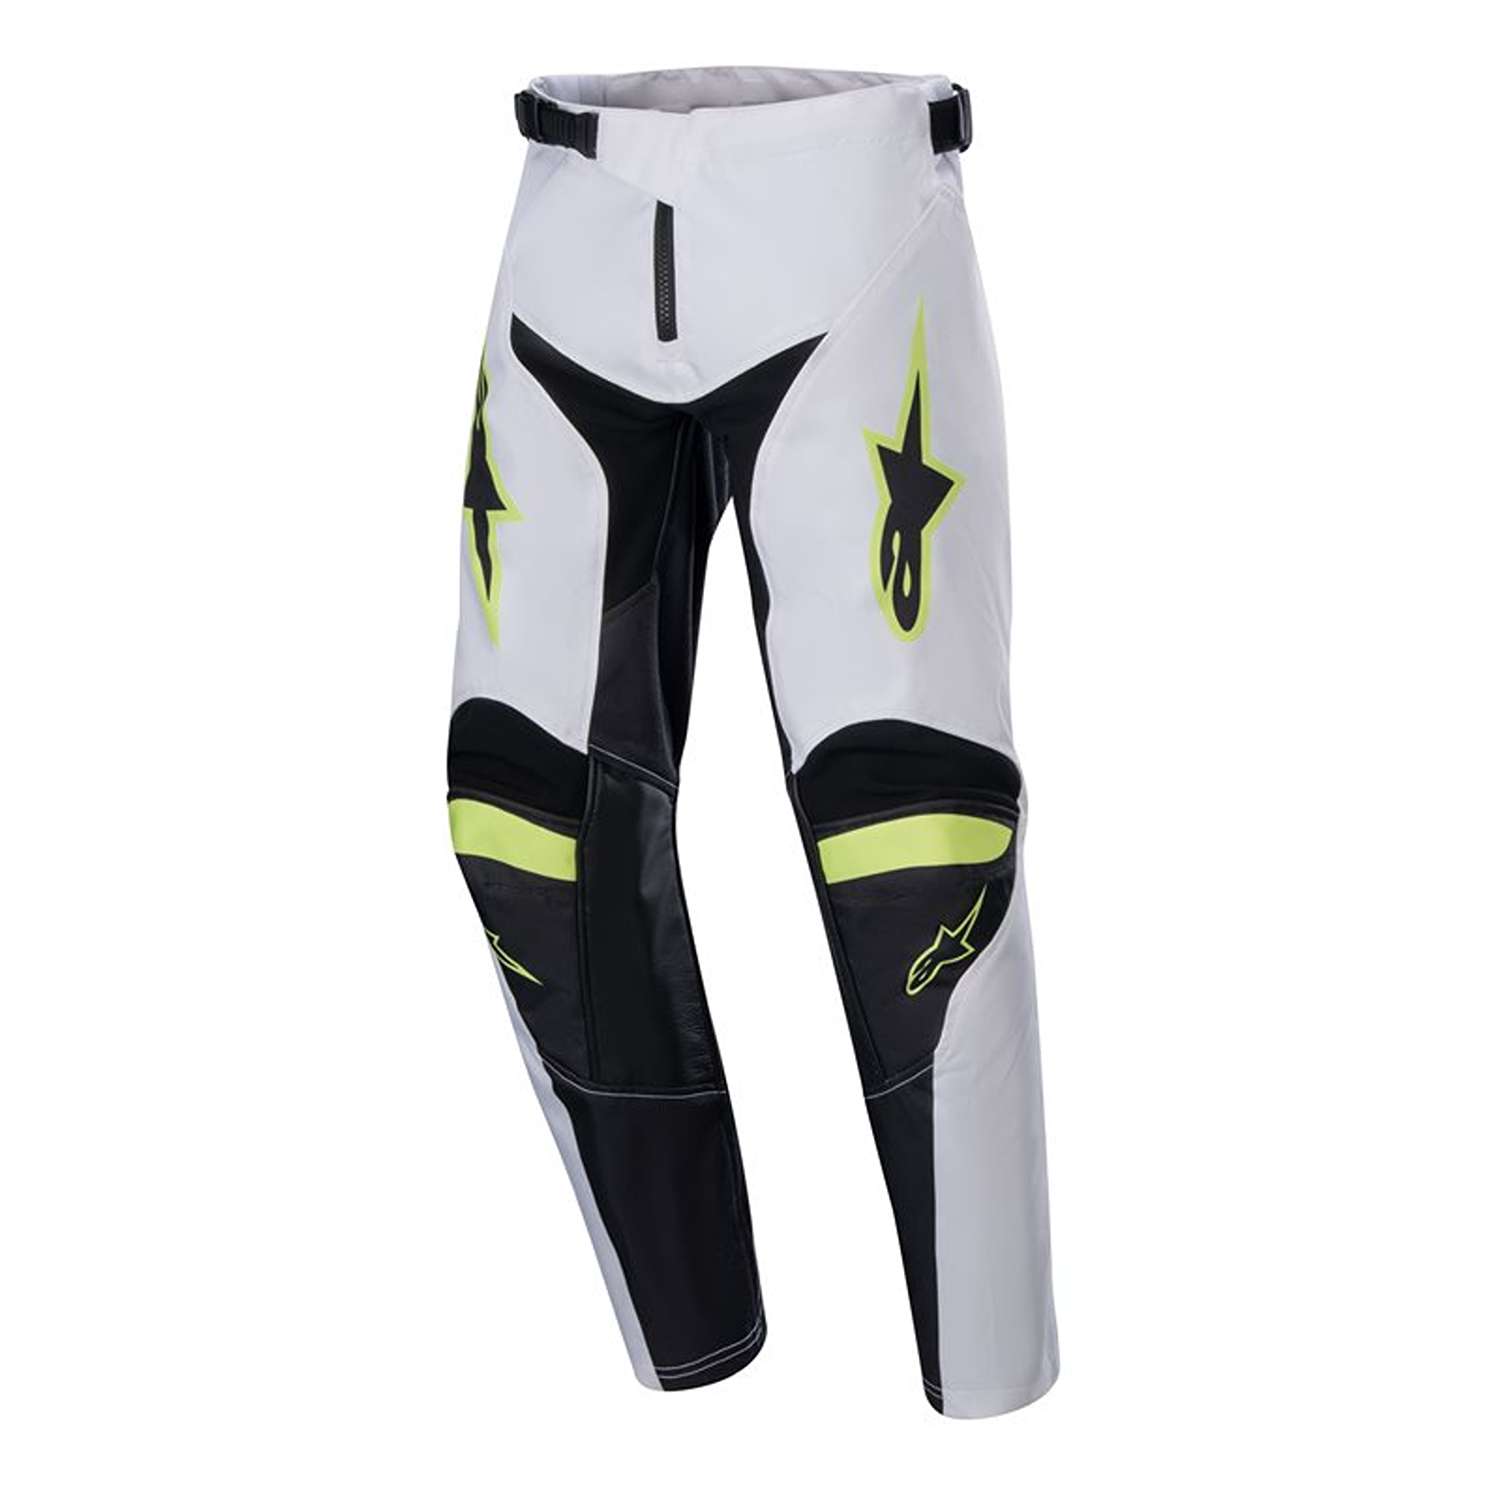 Image of Alpinestars Youth Racer Lucent Pants White Neon Red Yellow Fluo Größe 26